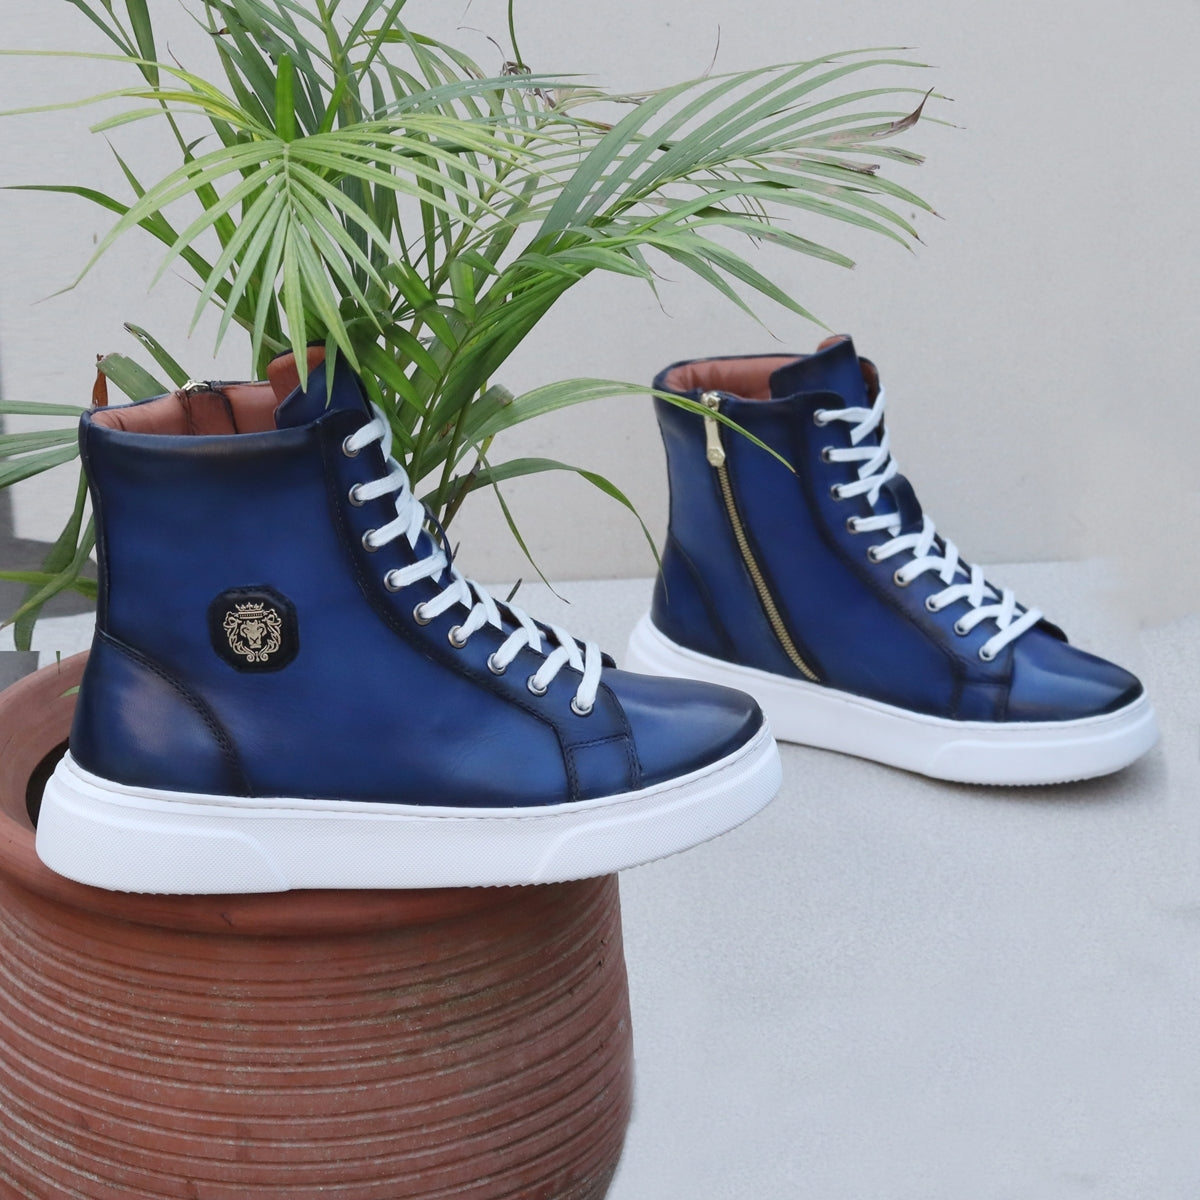 High Tops vs Low Tops: How Any Guy Can Style High Tops and How They Alter  an Outfit + 5 Looks, 2 Ways · Primer